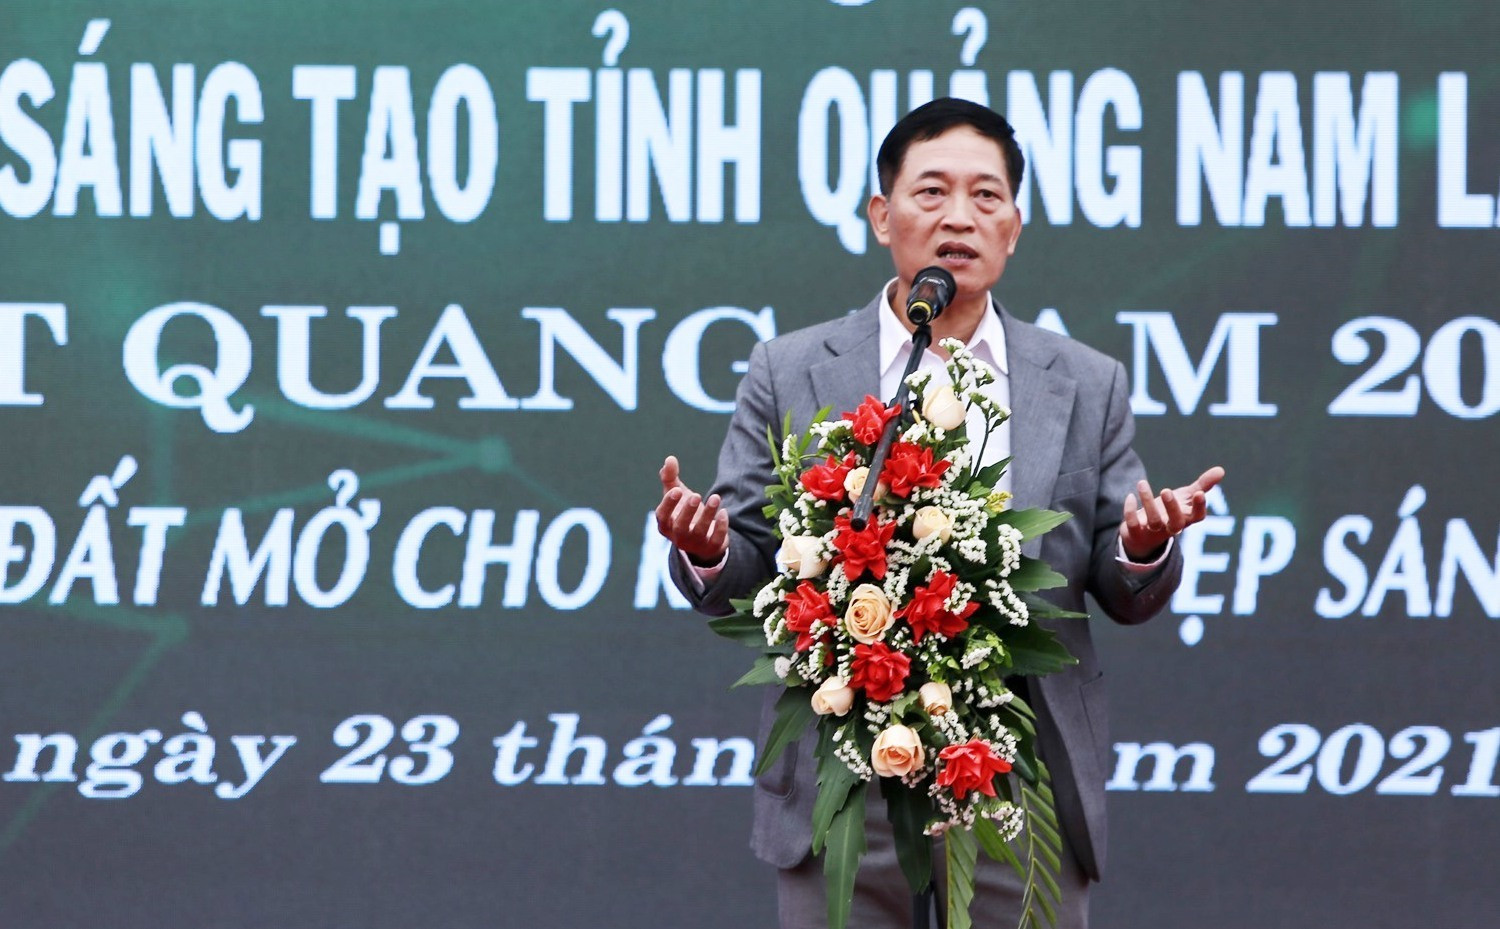 Deputy Minister of Science and Technology of Vietnam Tran Van Tung at TechFest Quang Nam 2021